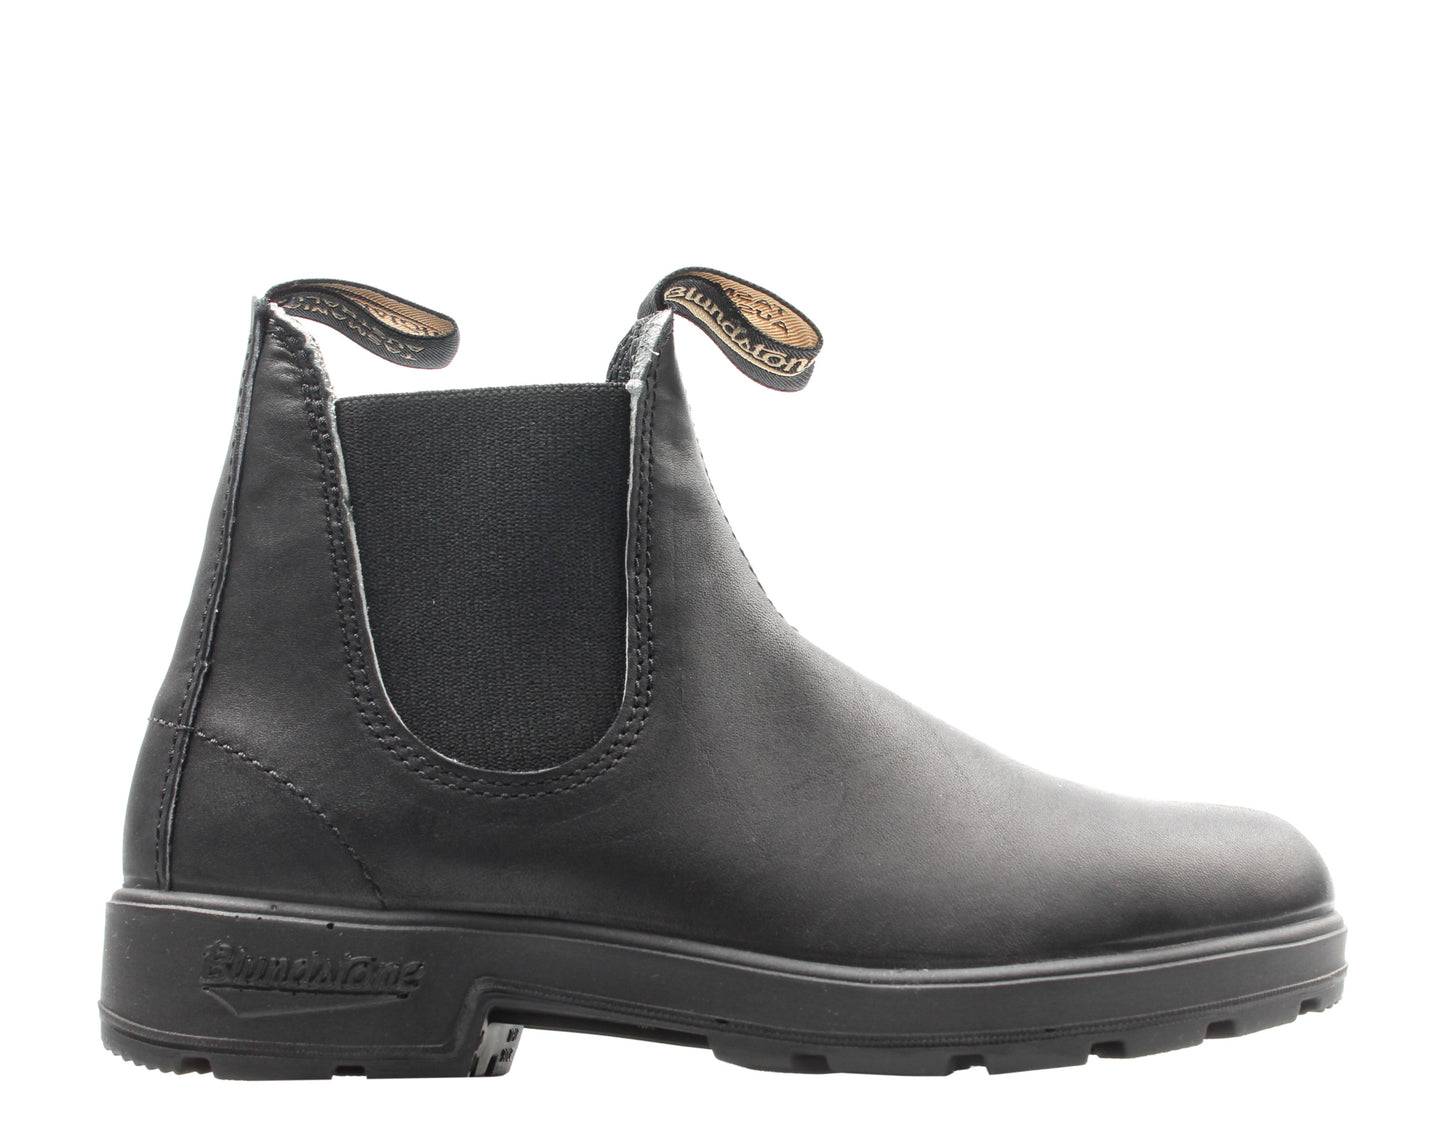 Blundstone 510 Originals Classic Chelsea Boots Black Pull-On Adult BL510